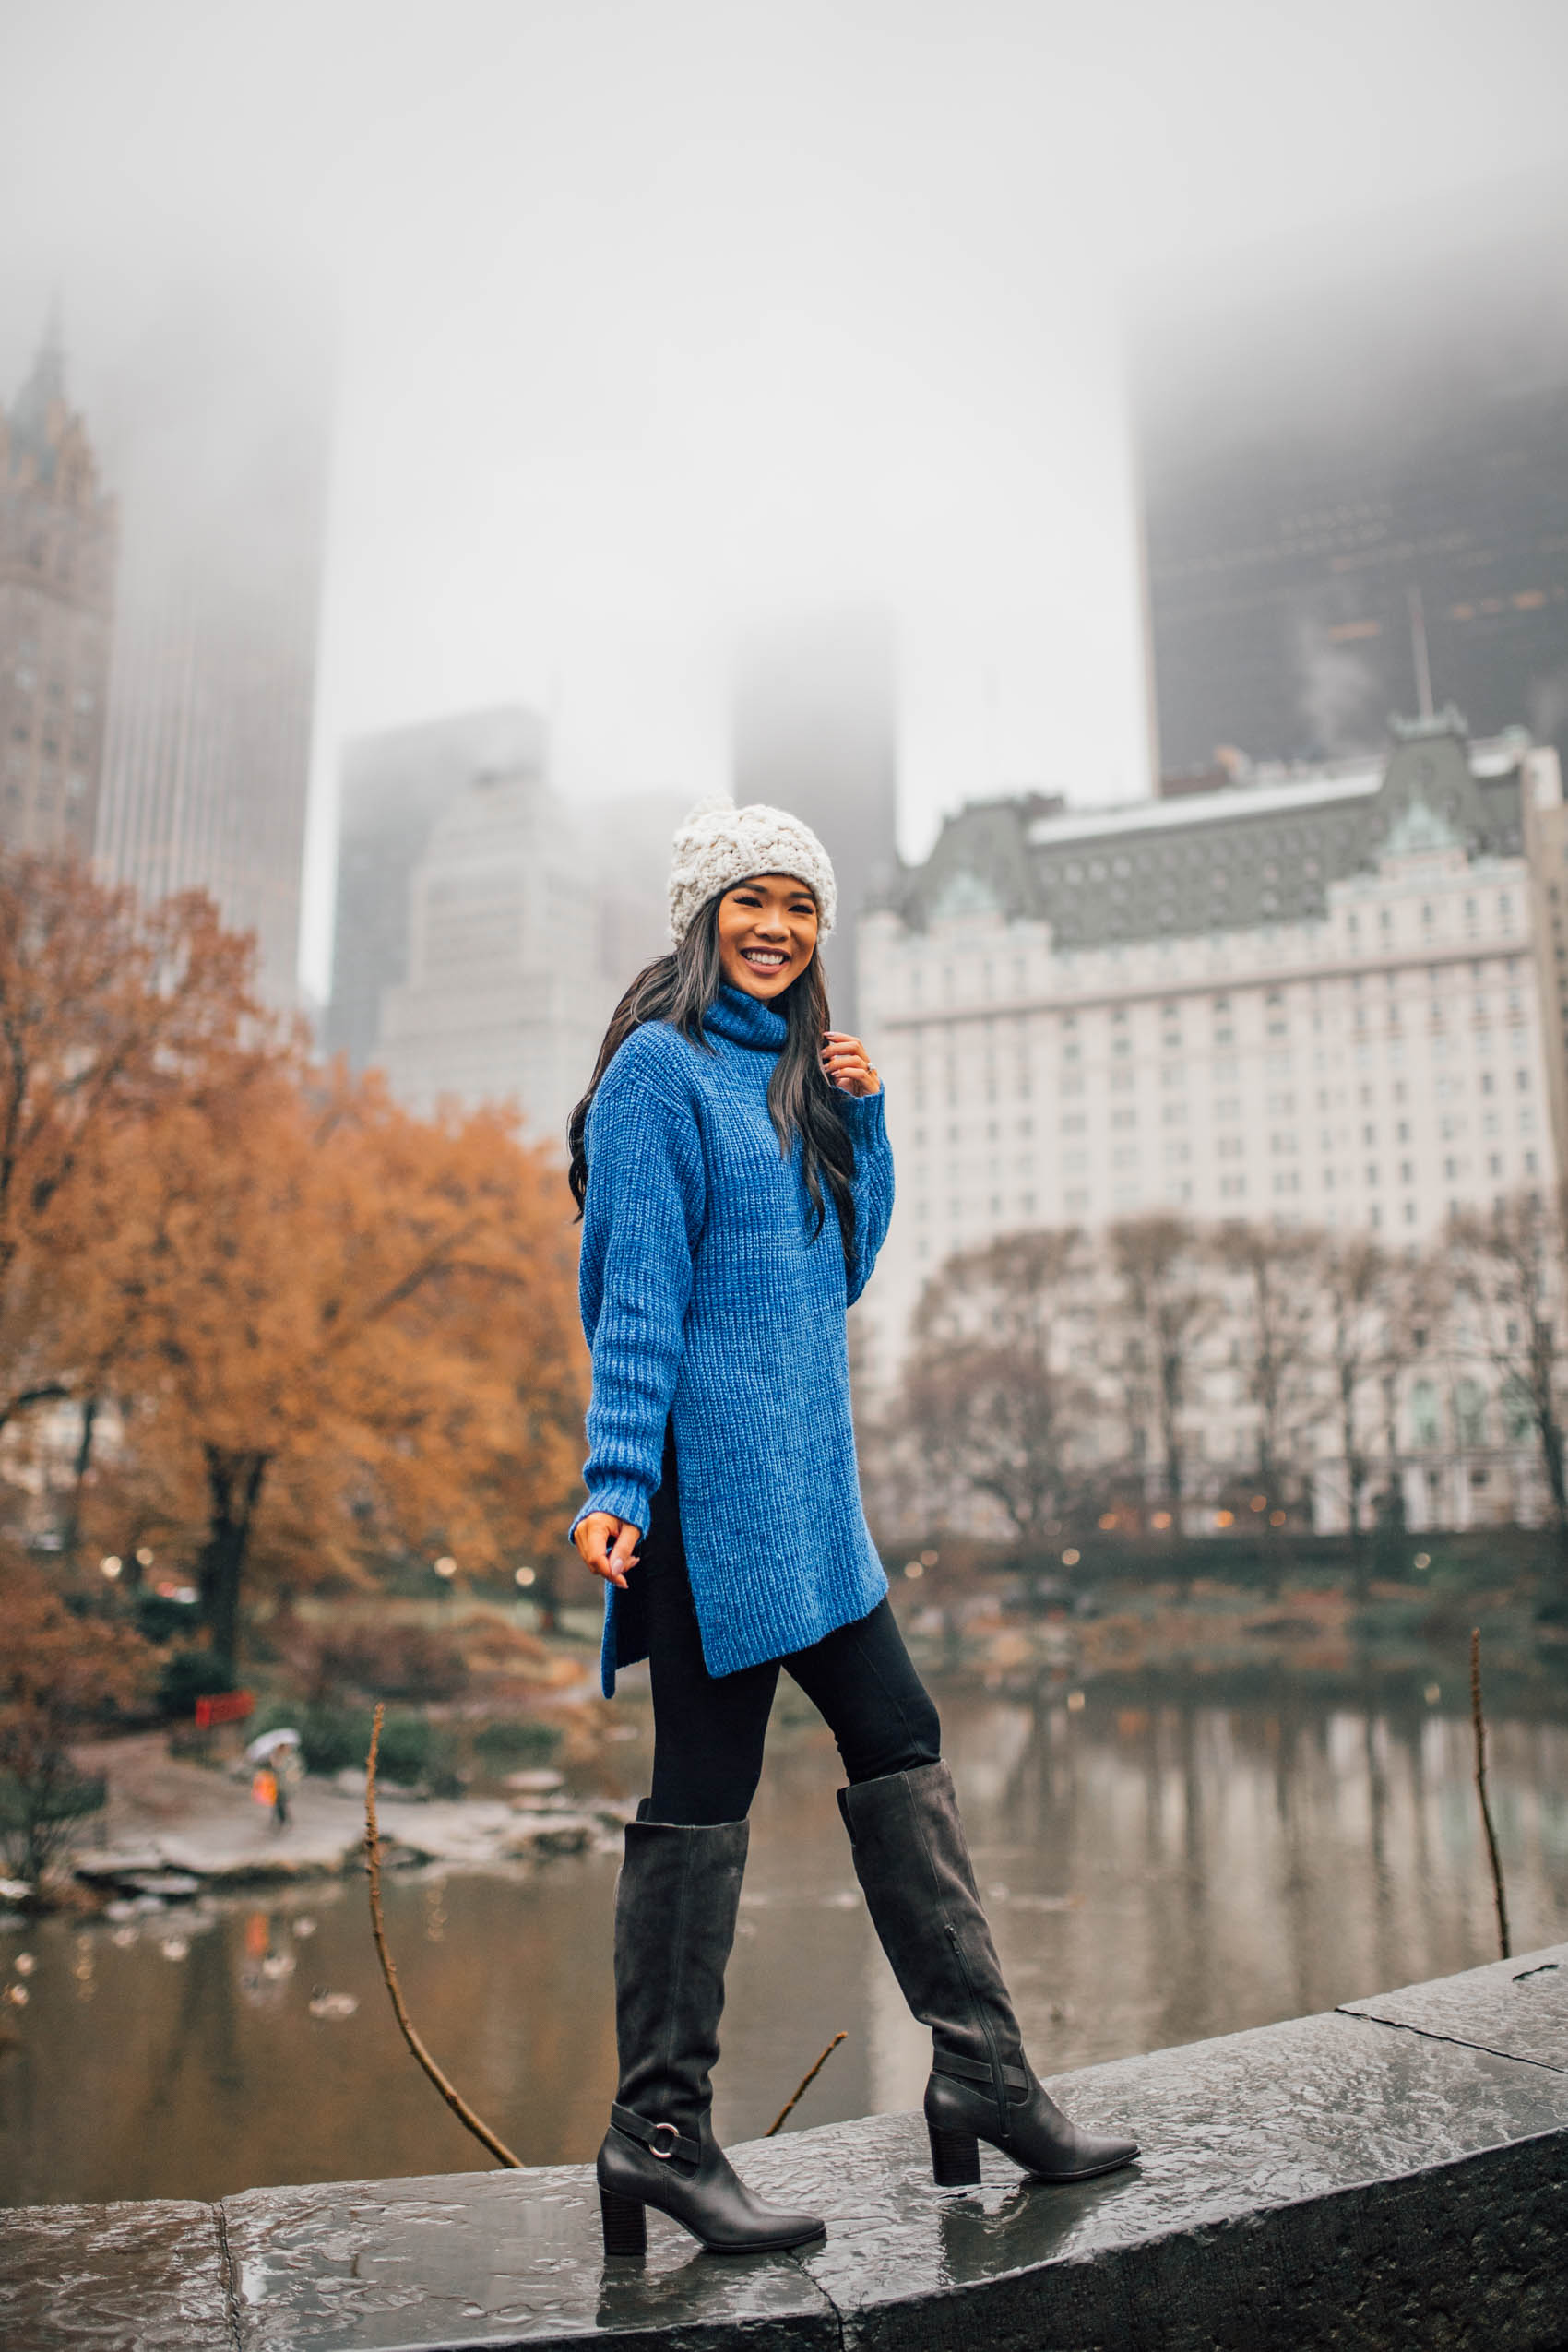 Blogger Hoang-Kim sharing the best views in Central Park in New York City